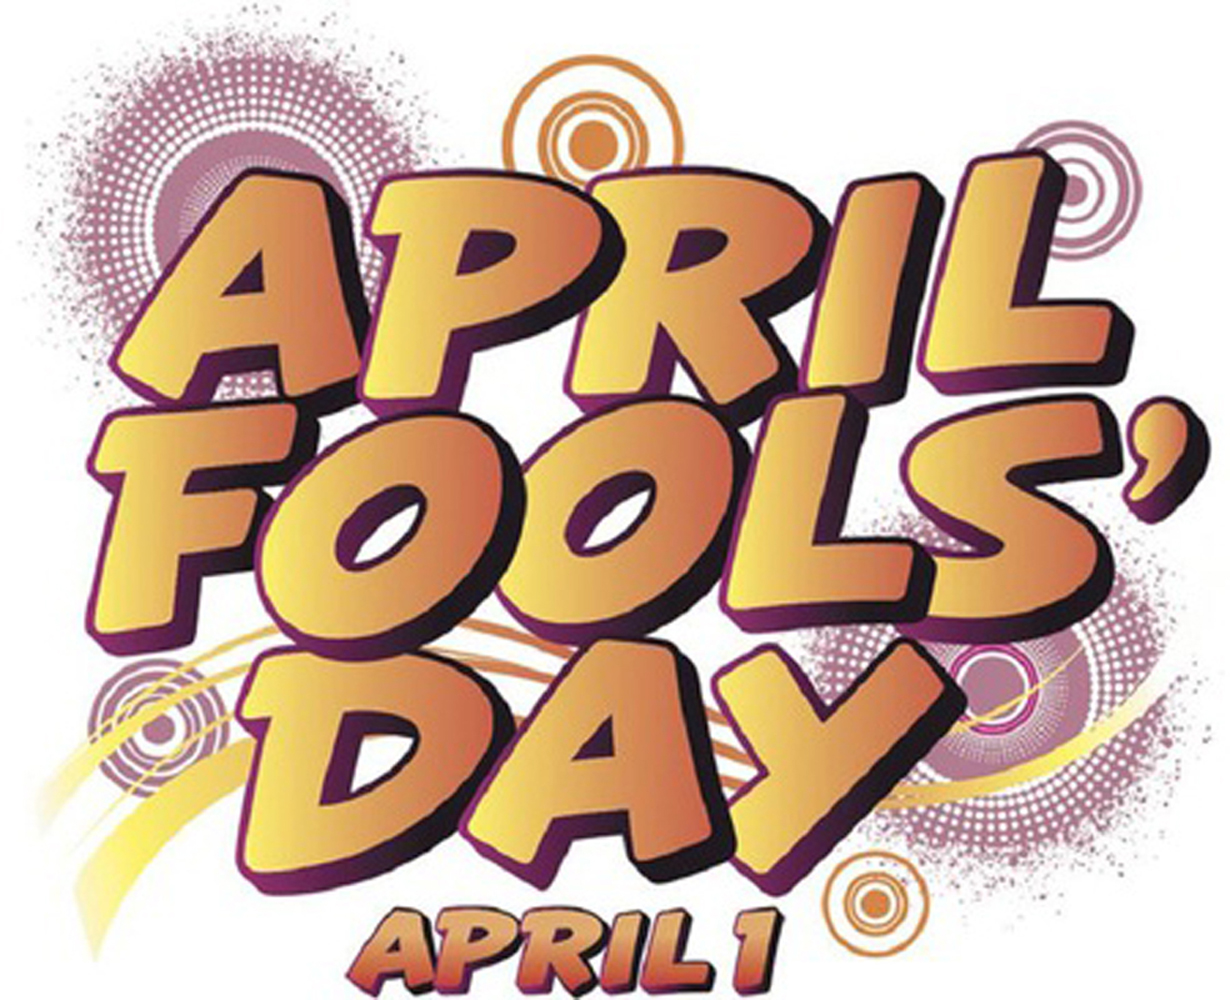 A Walk on Words : Happy April Fools' Day! + Interview with T. Rae